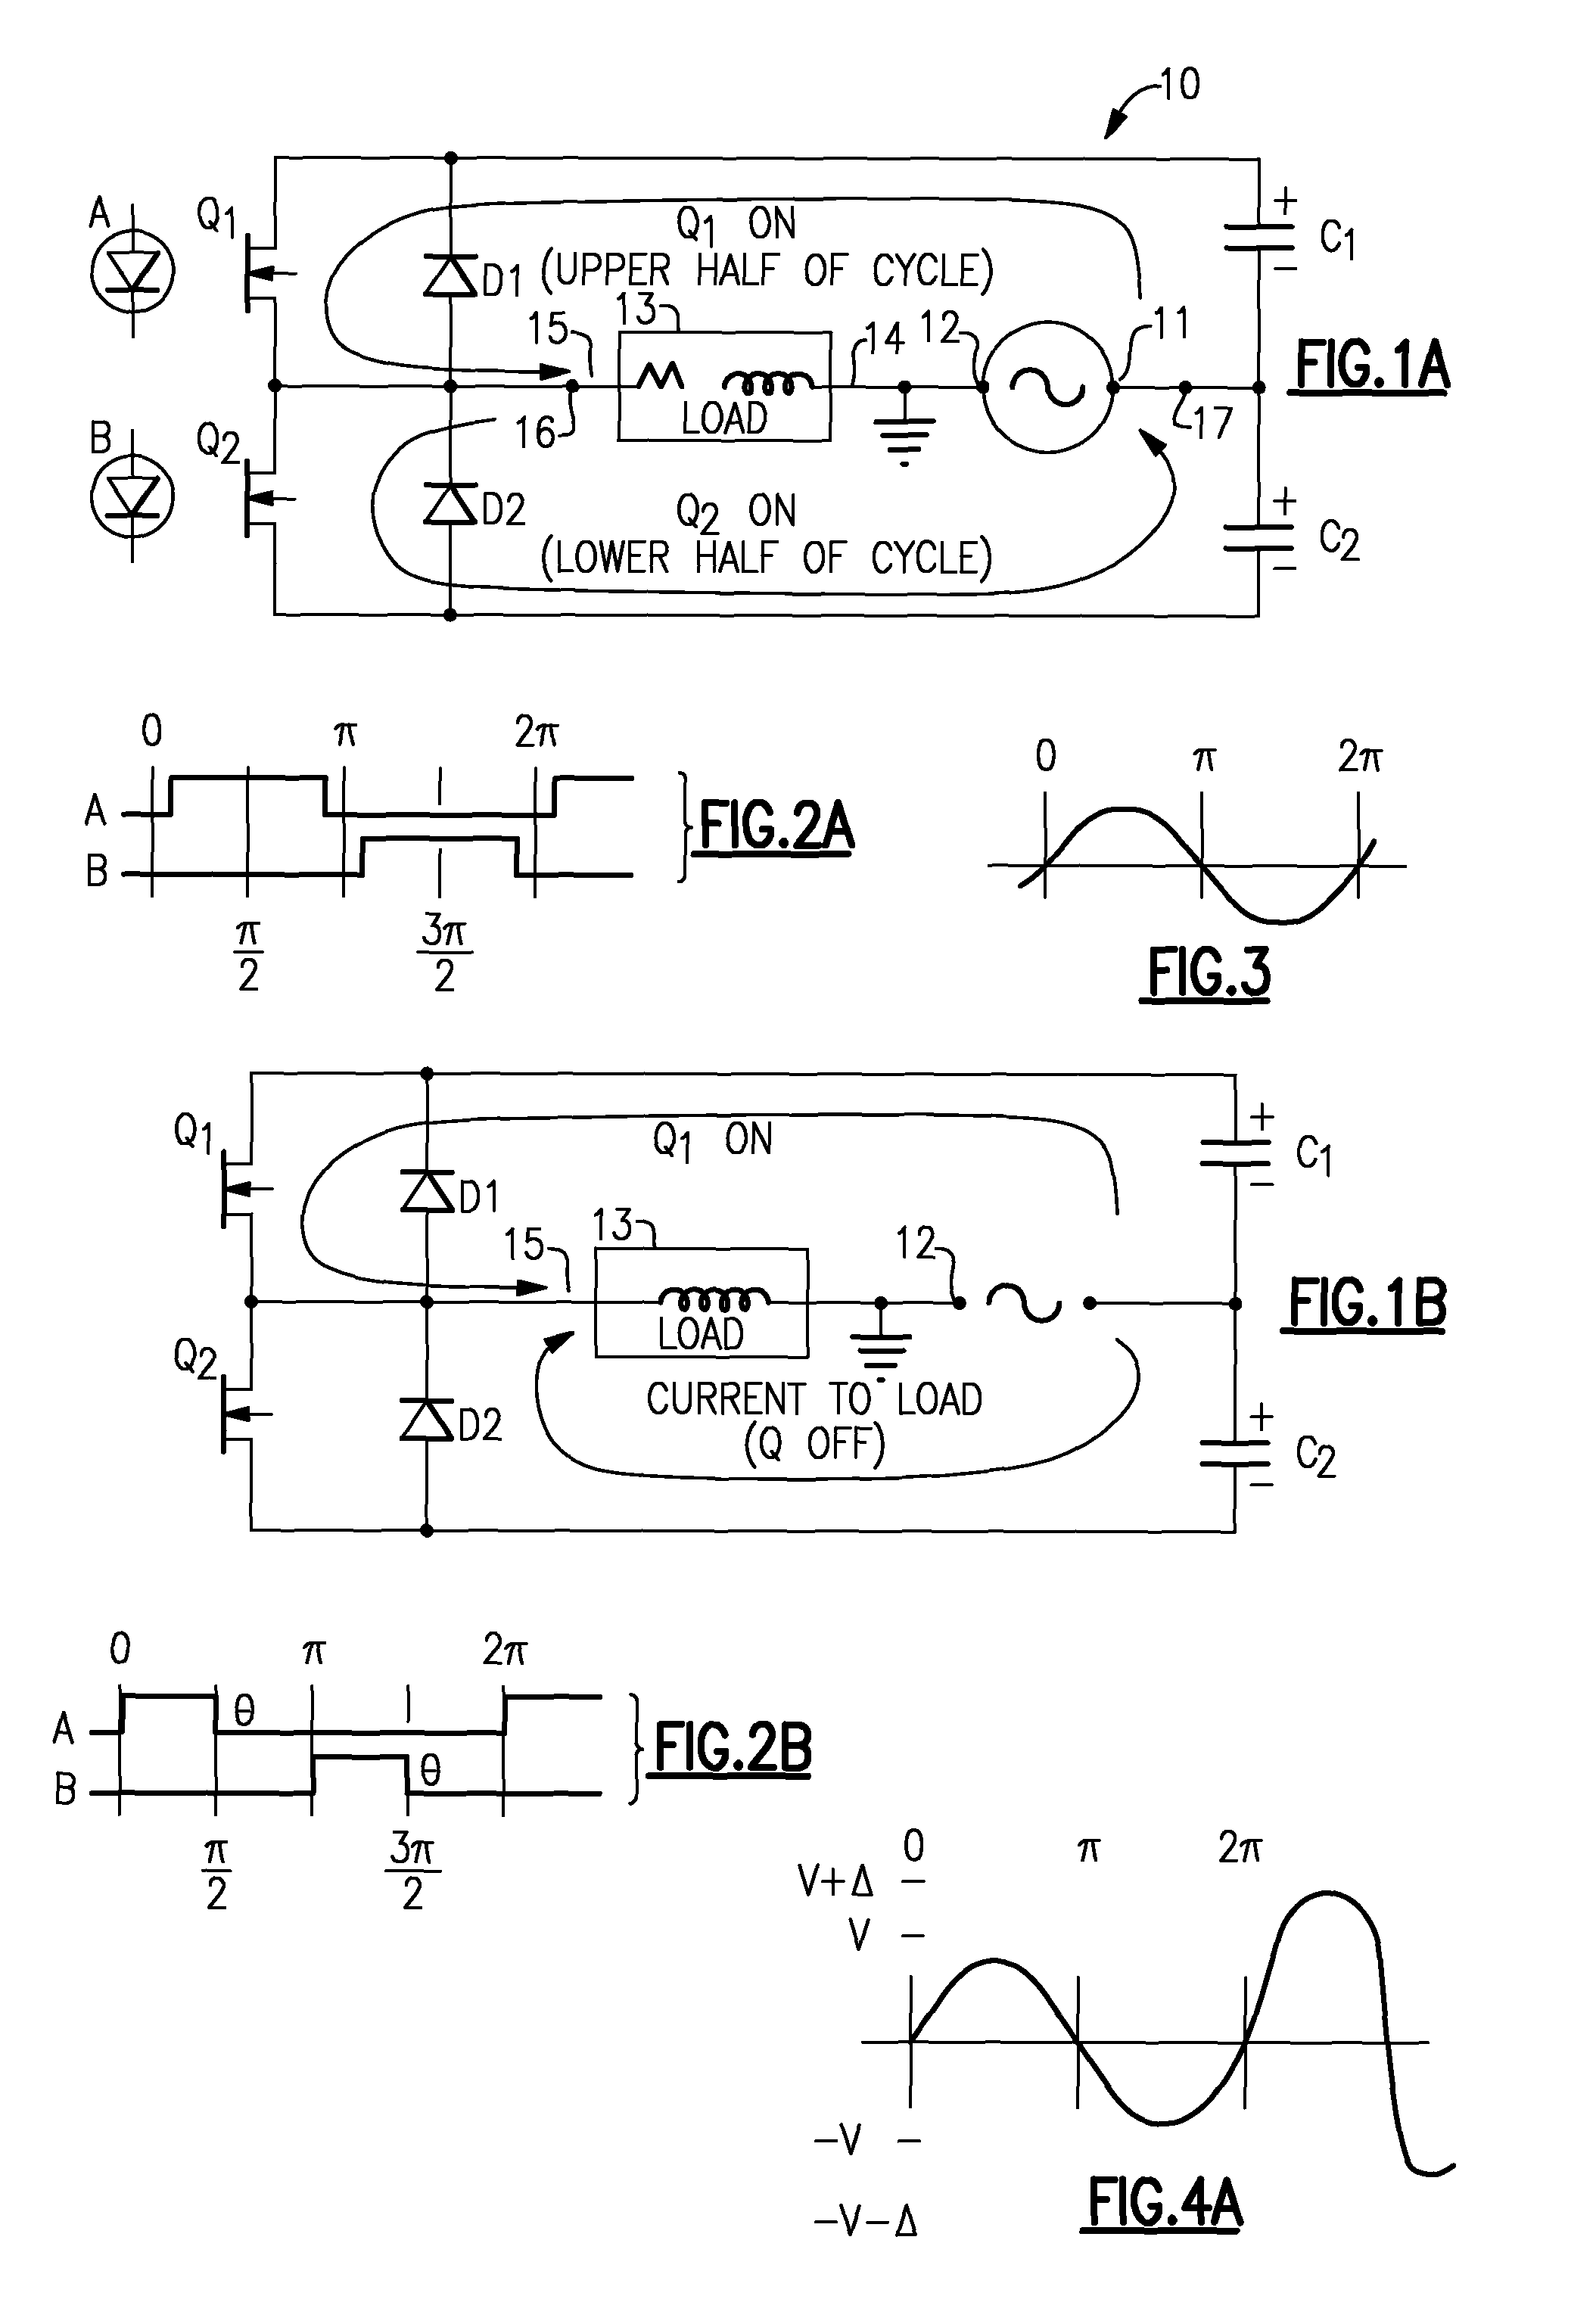 AC line voltage conditioner and controller